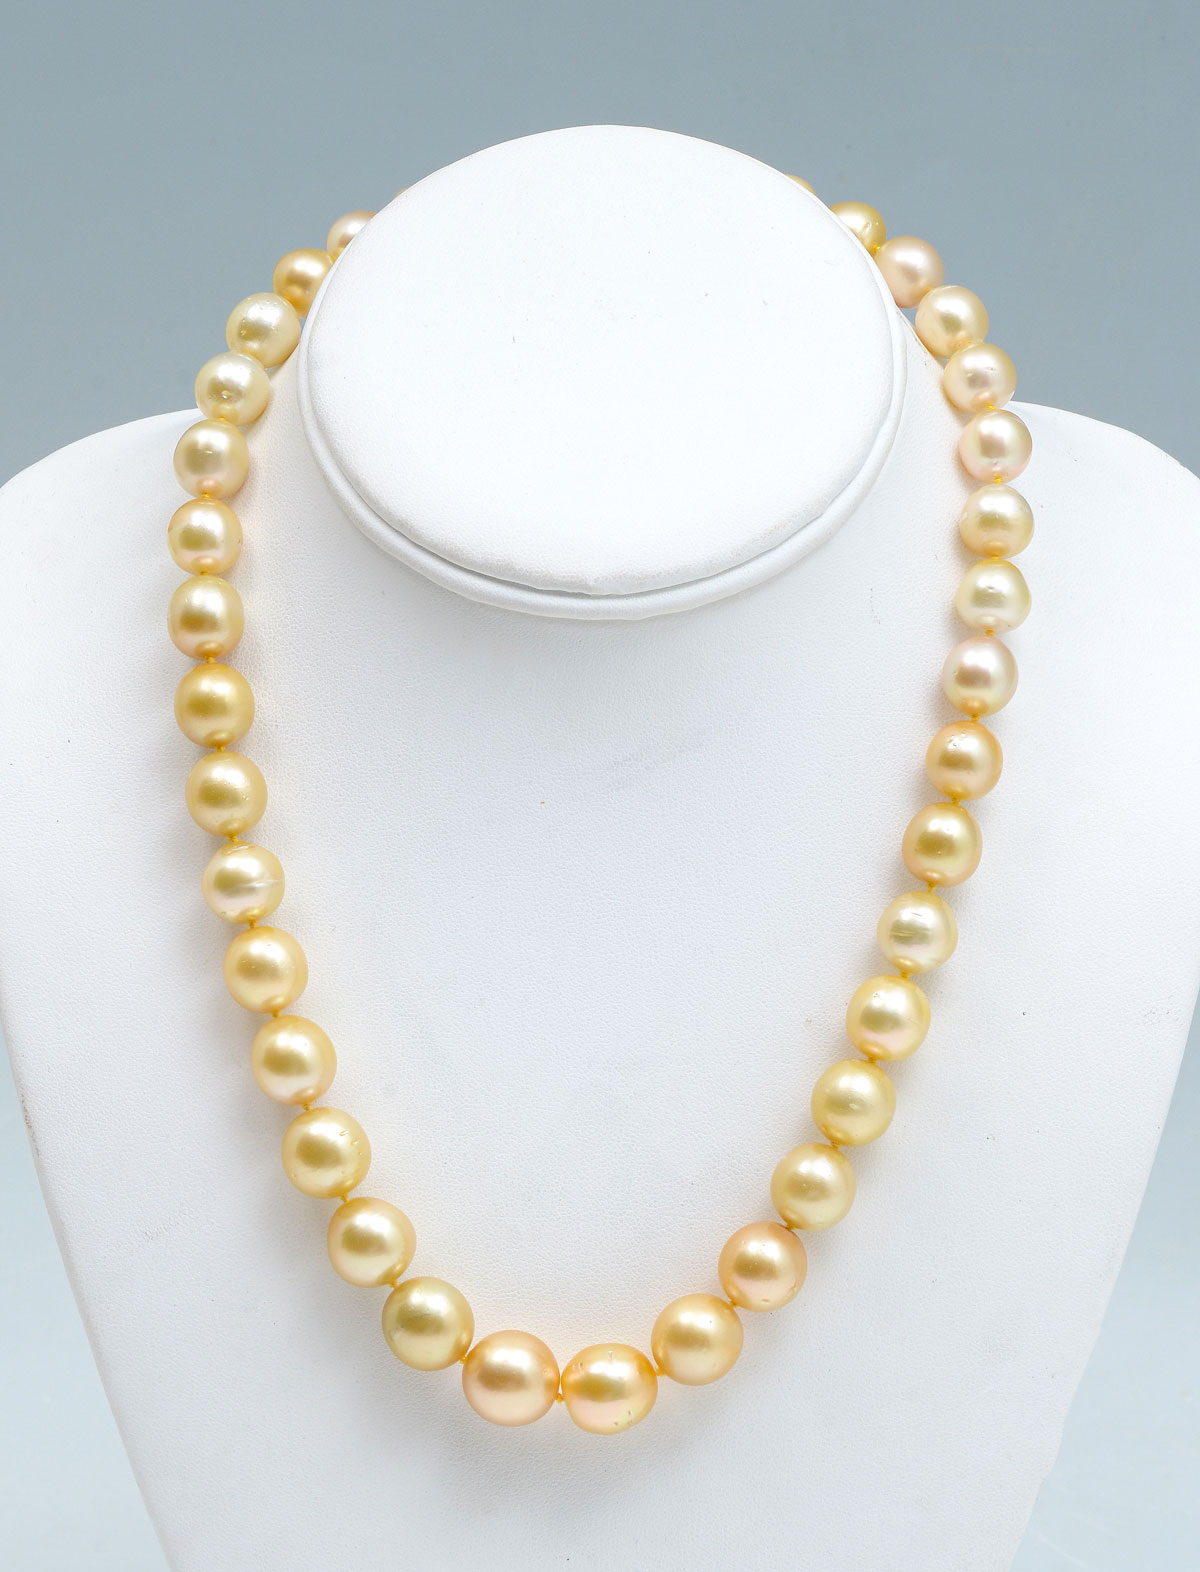 GOLDEN SOUTH SEA PEARL NECKLACE  36c41f